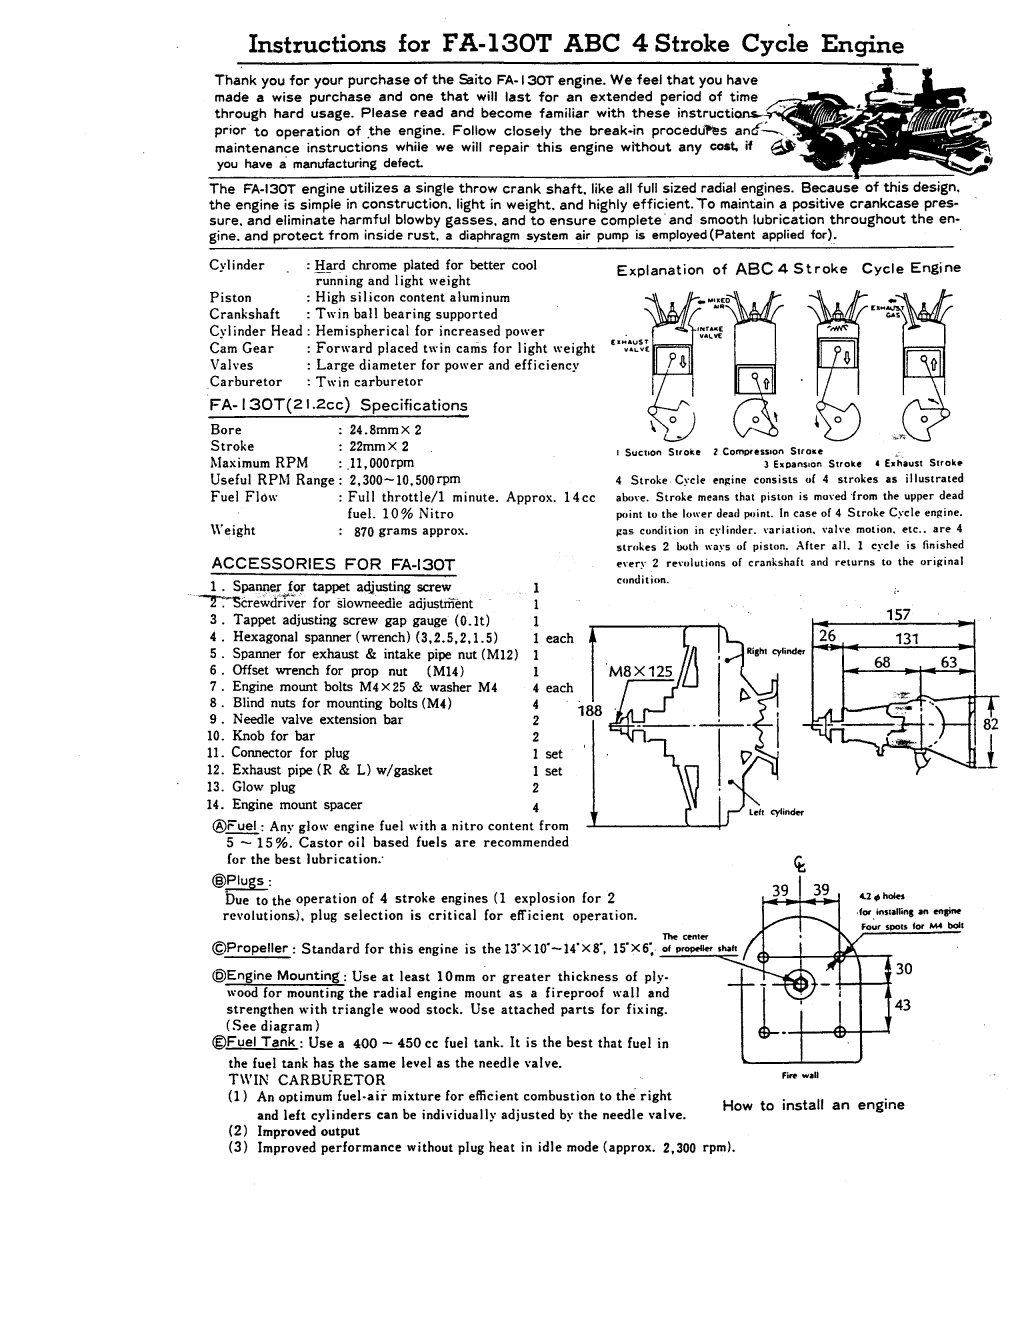 Instructions for FA-130T ABC 4 Stroke Cycle Engine